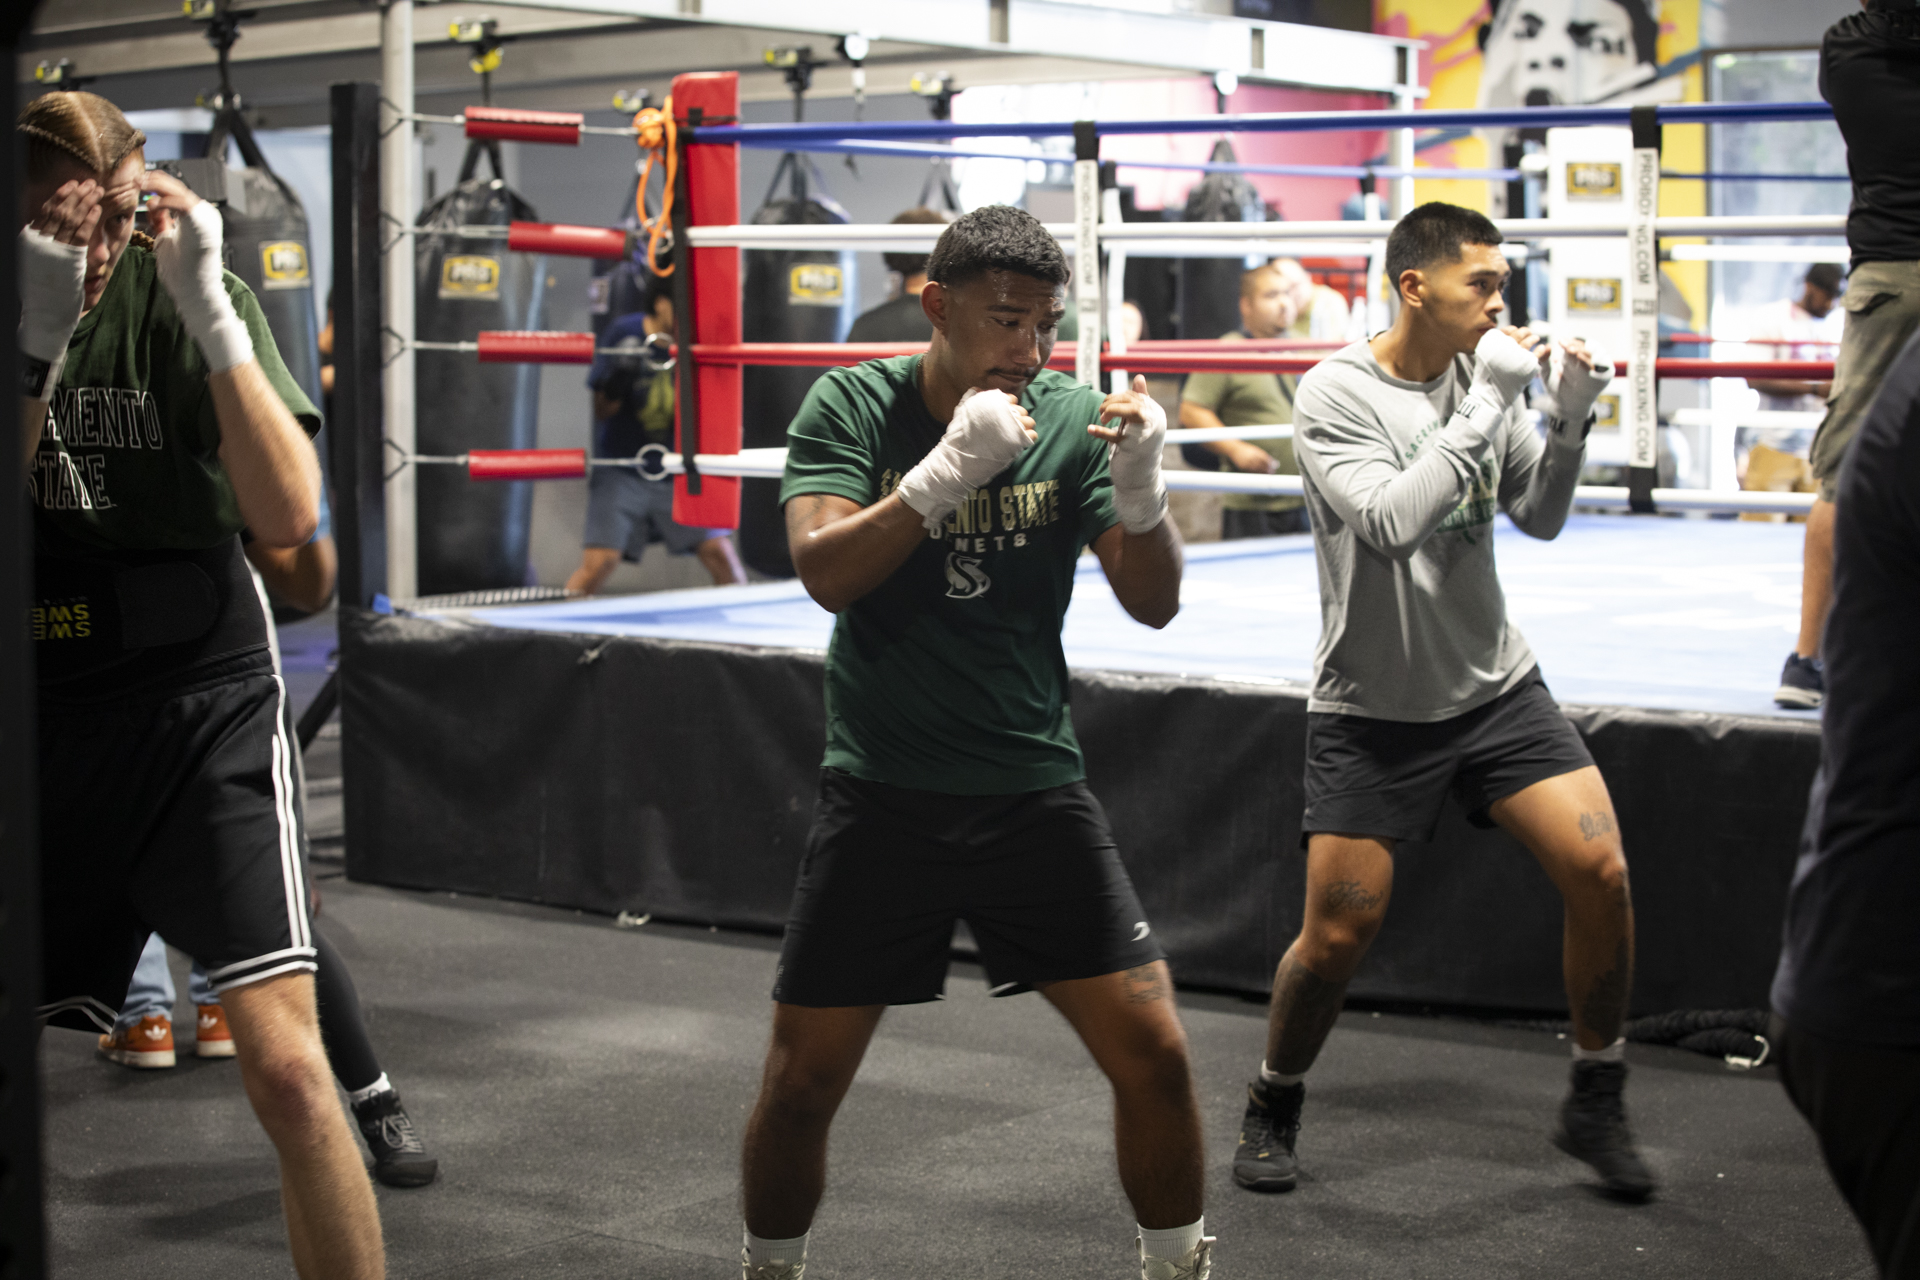 Boxers training in a gym.